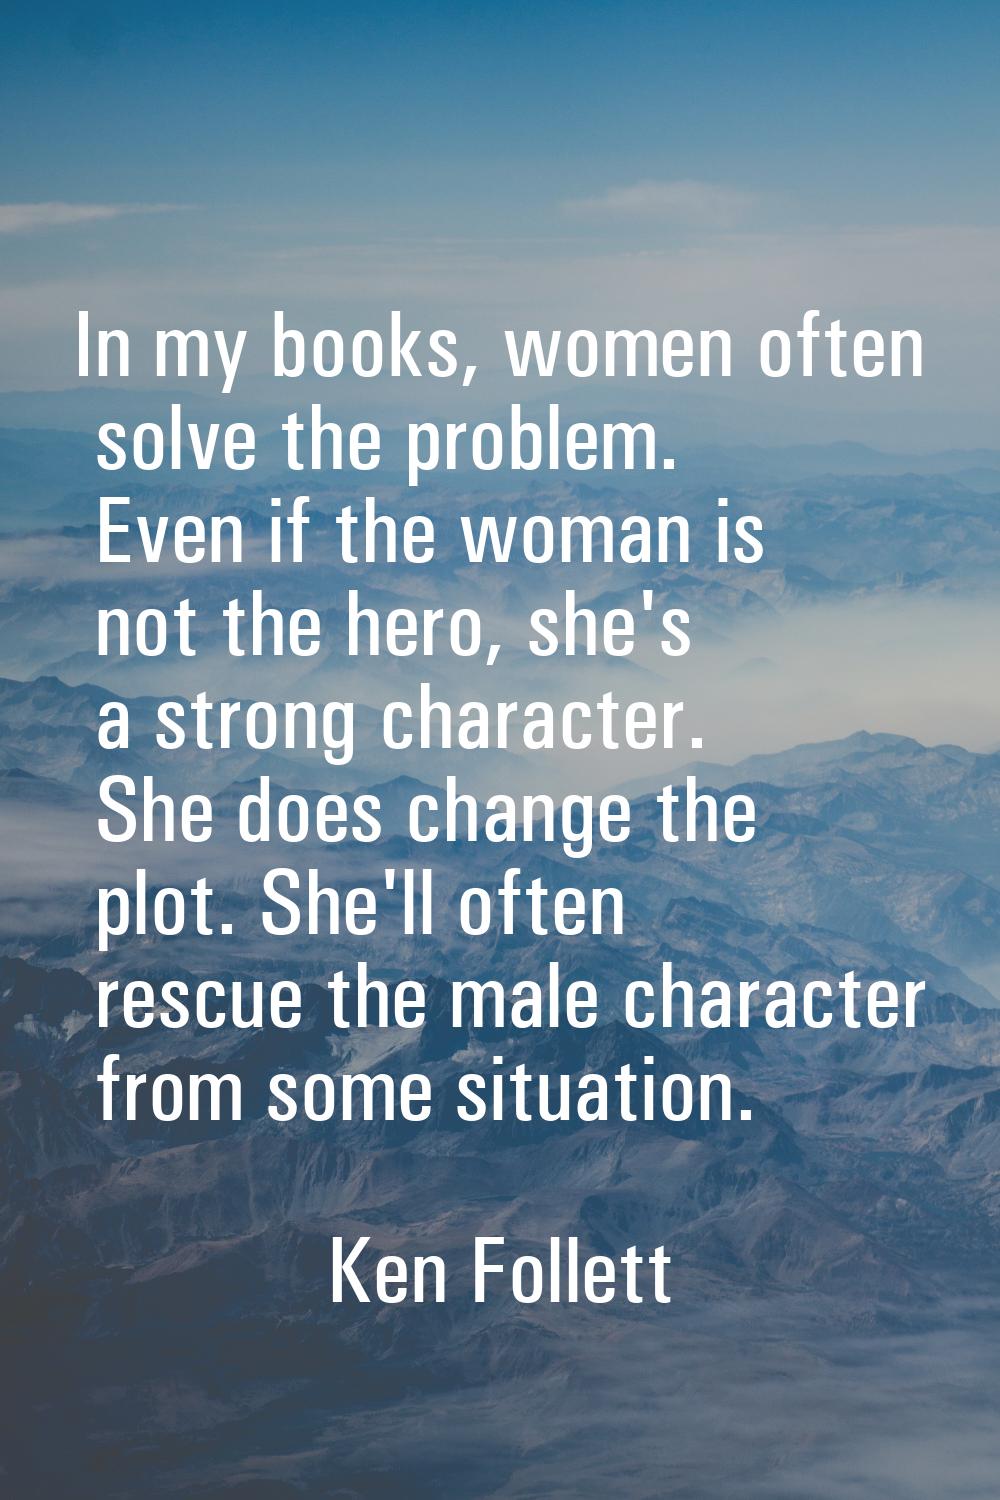 In my books, women often solve the problem. Even if the woman is not the hero, she's a strong chara